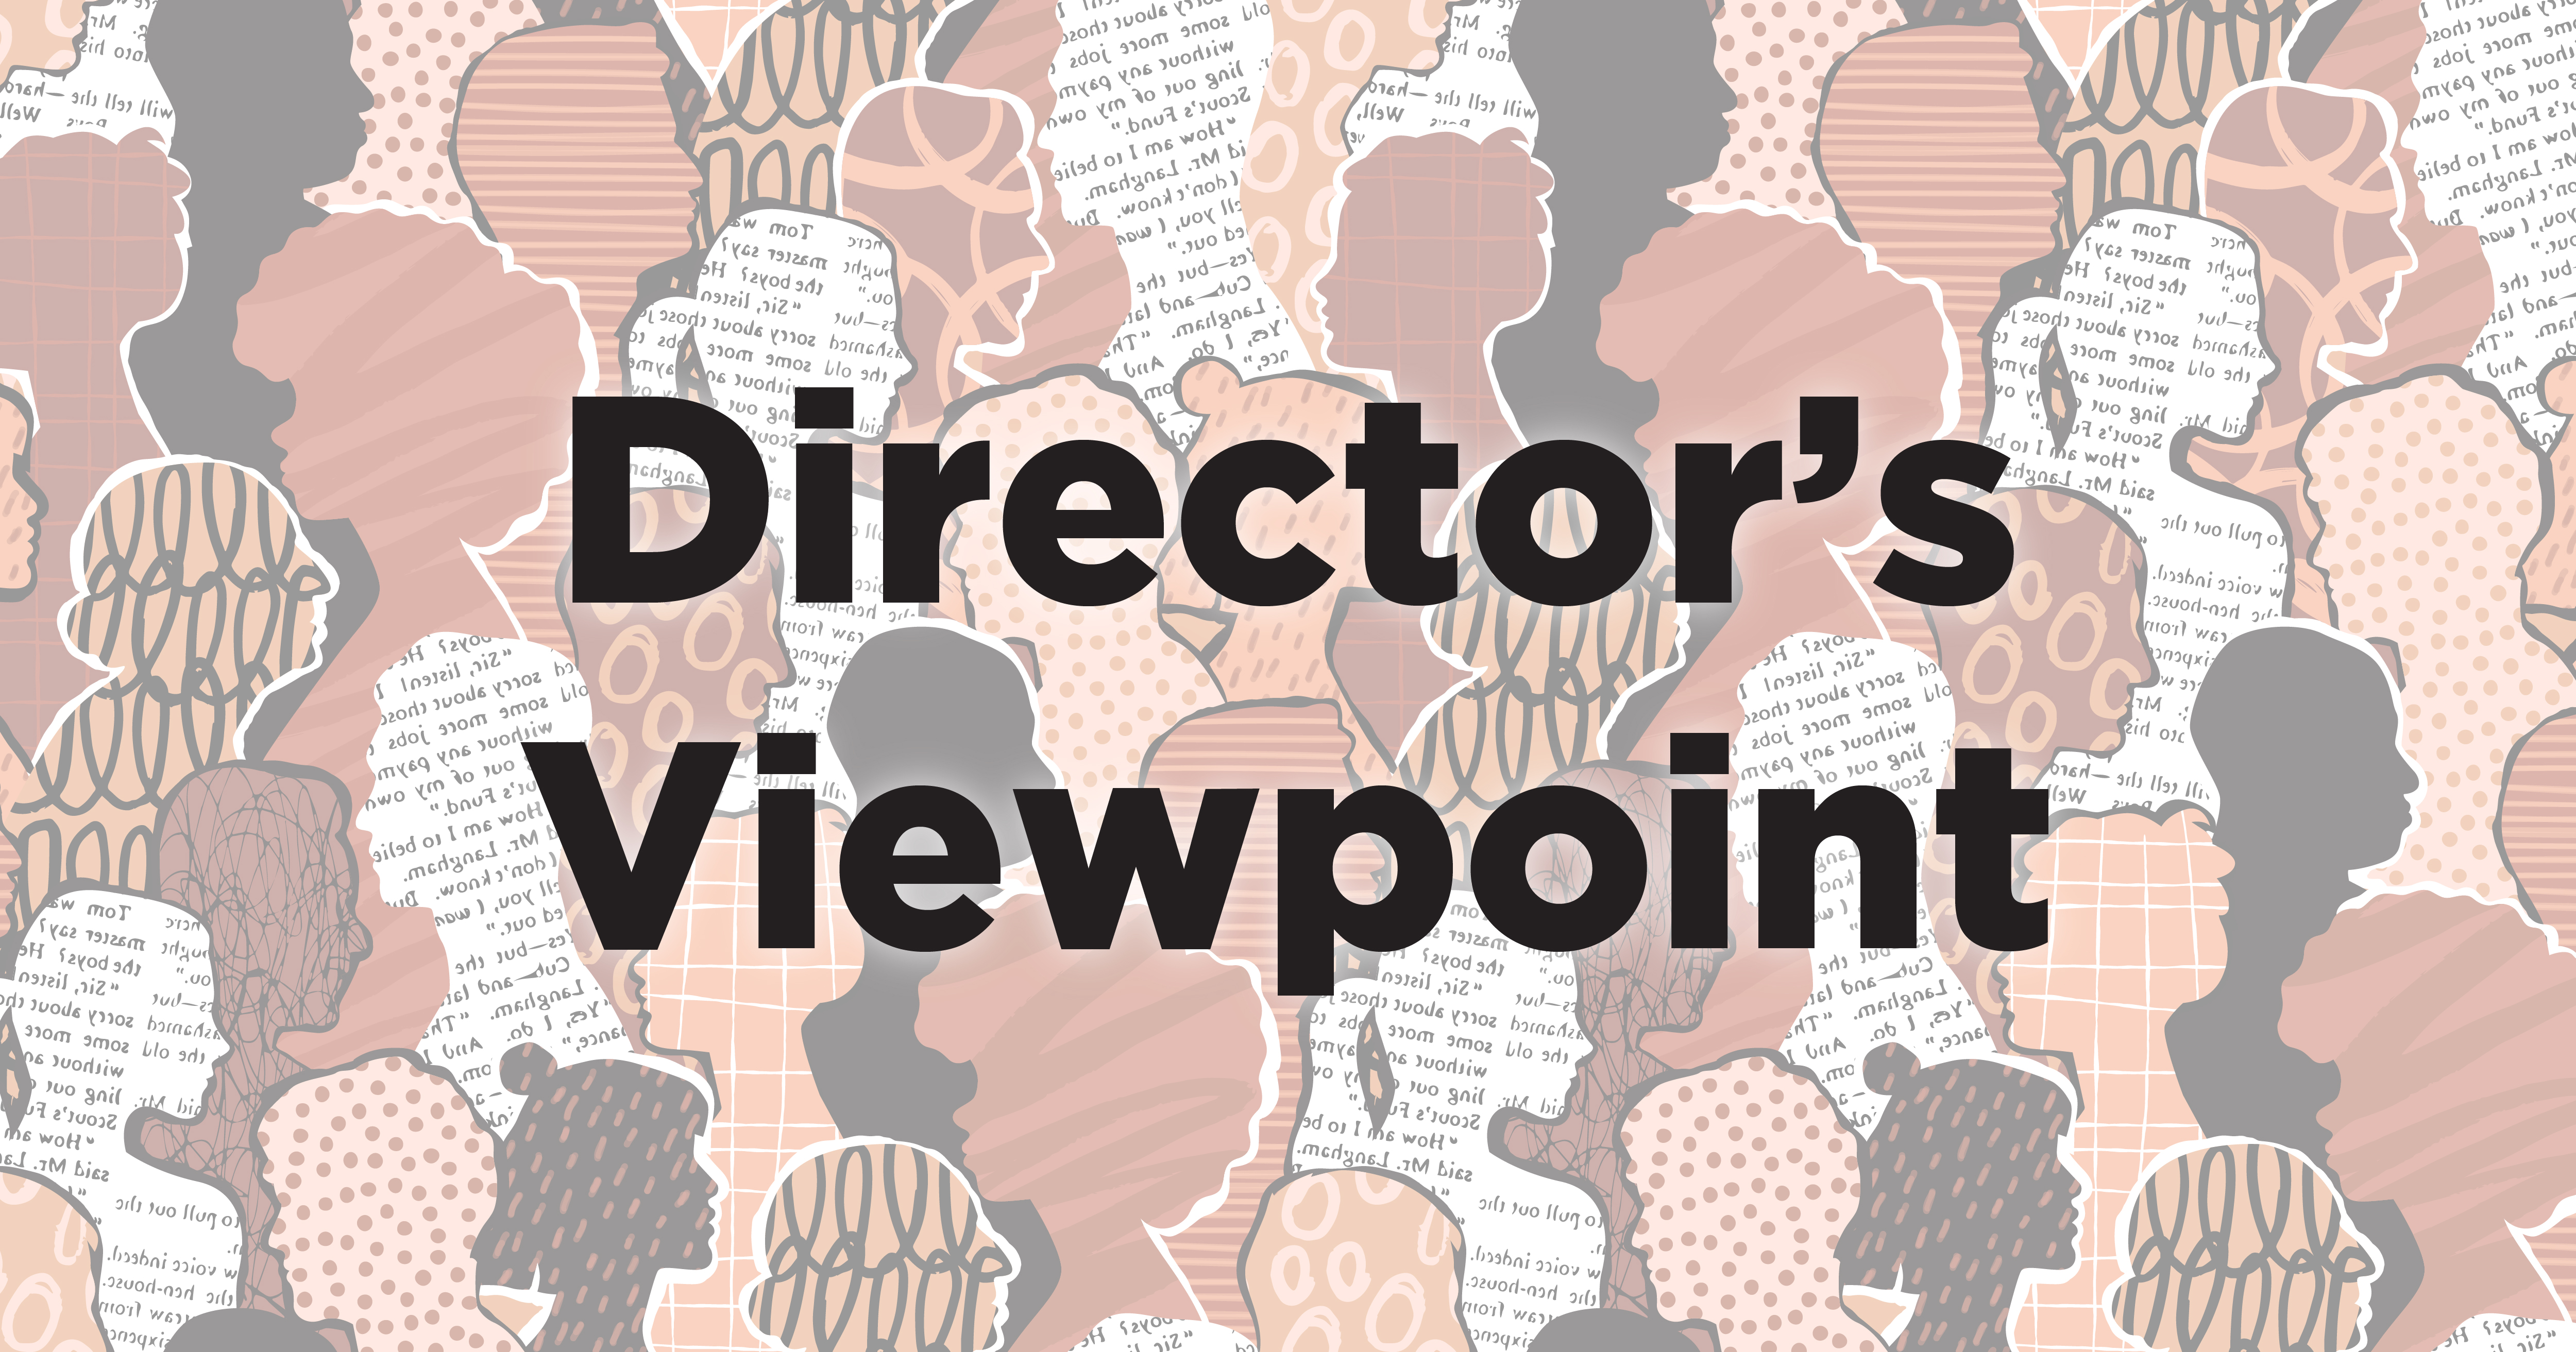 Multi-colored silhouettes of heads, with black print on top that reads "Director's Viewpoint"